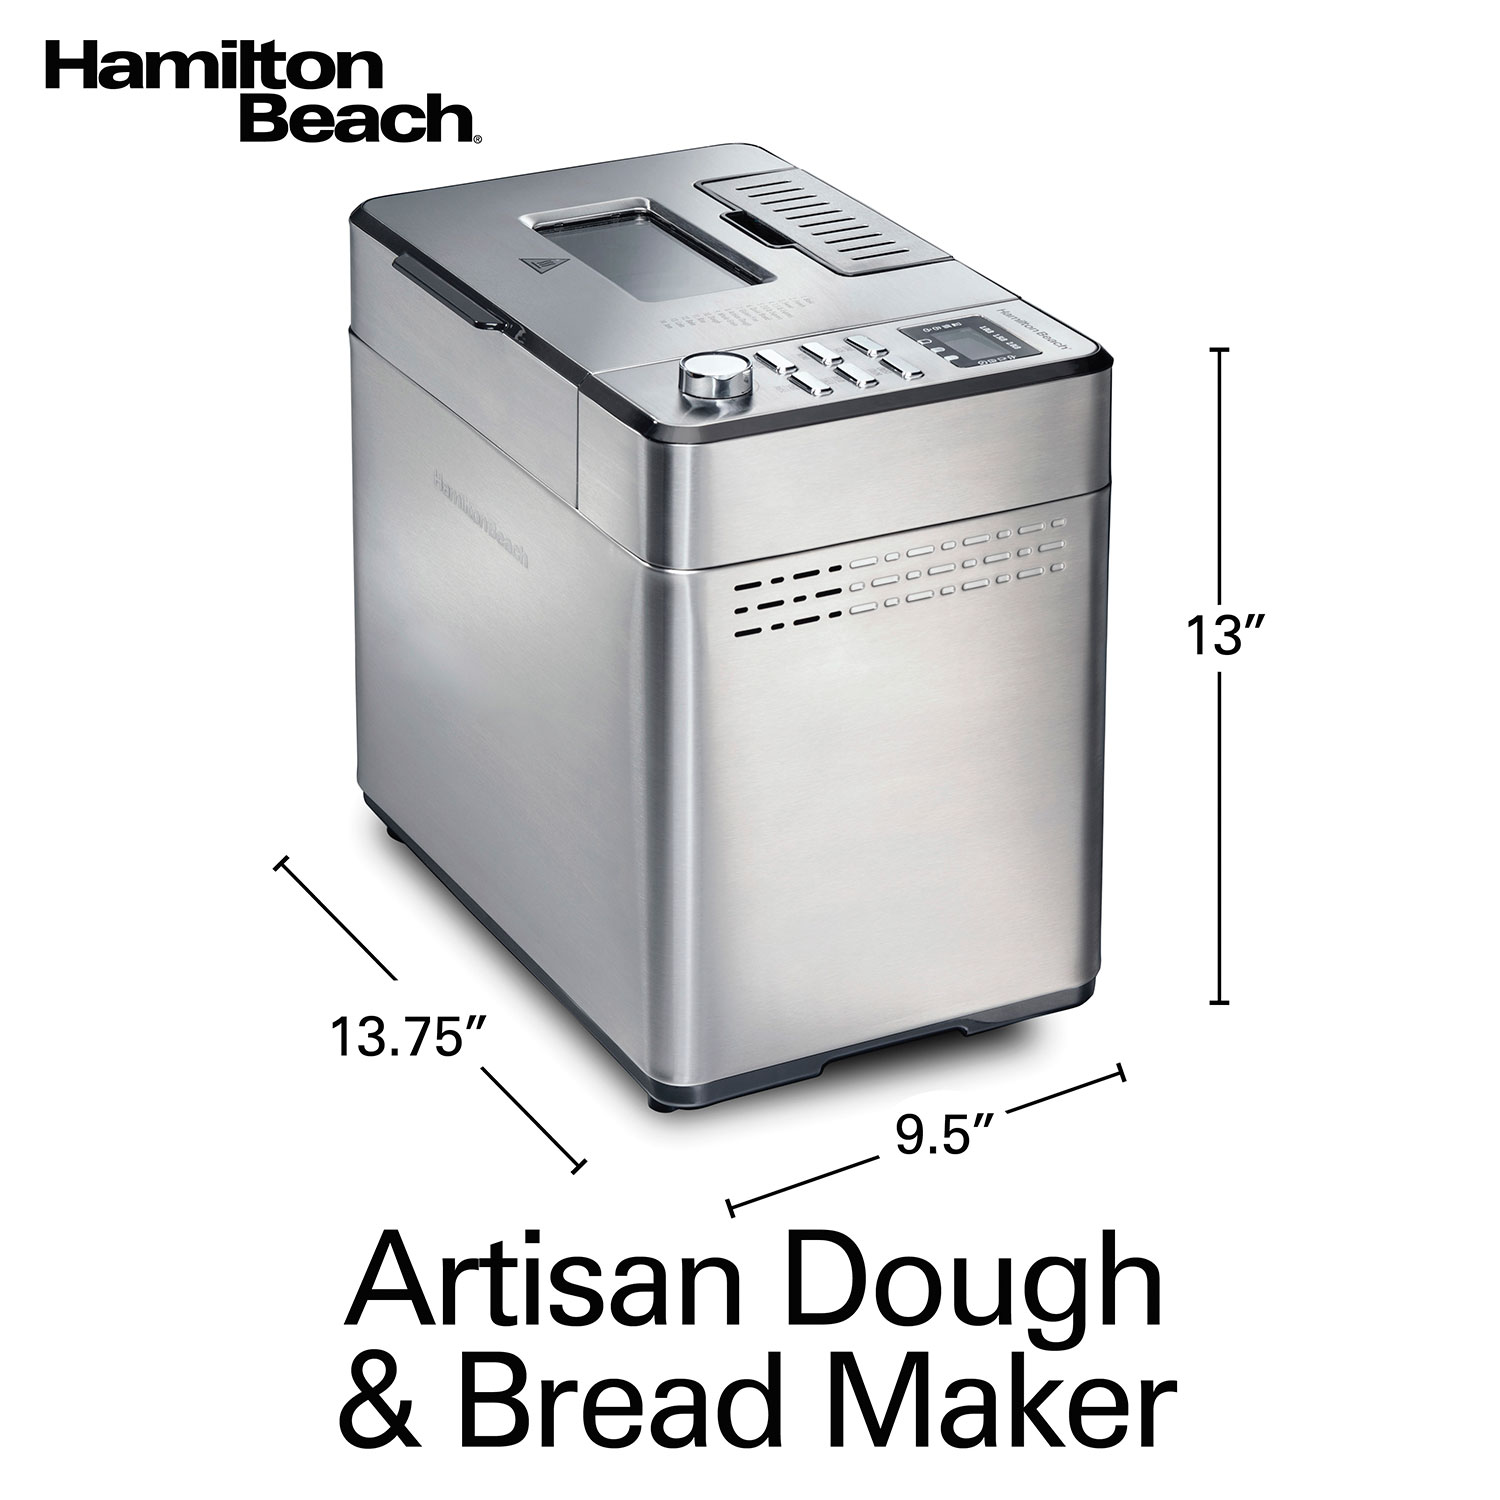  Hamilton Beach 29890 Premium Dough & Bread Maker Machine with  Auto Fruit and Nut Dispenser, 2 lb. Loaf Capacity, 21 Programmable Settings  Includes Gluten Free+Keto, Stainless Steel: Home & Kitchen